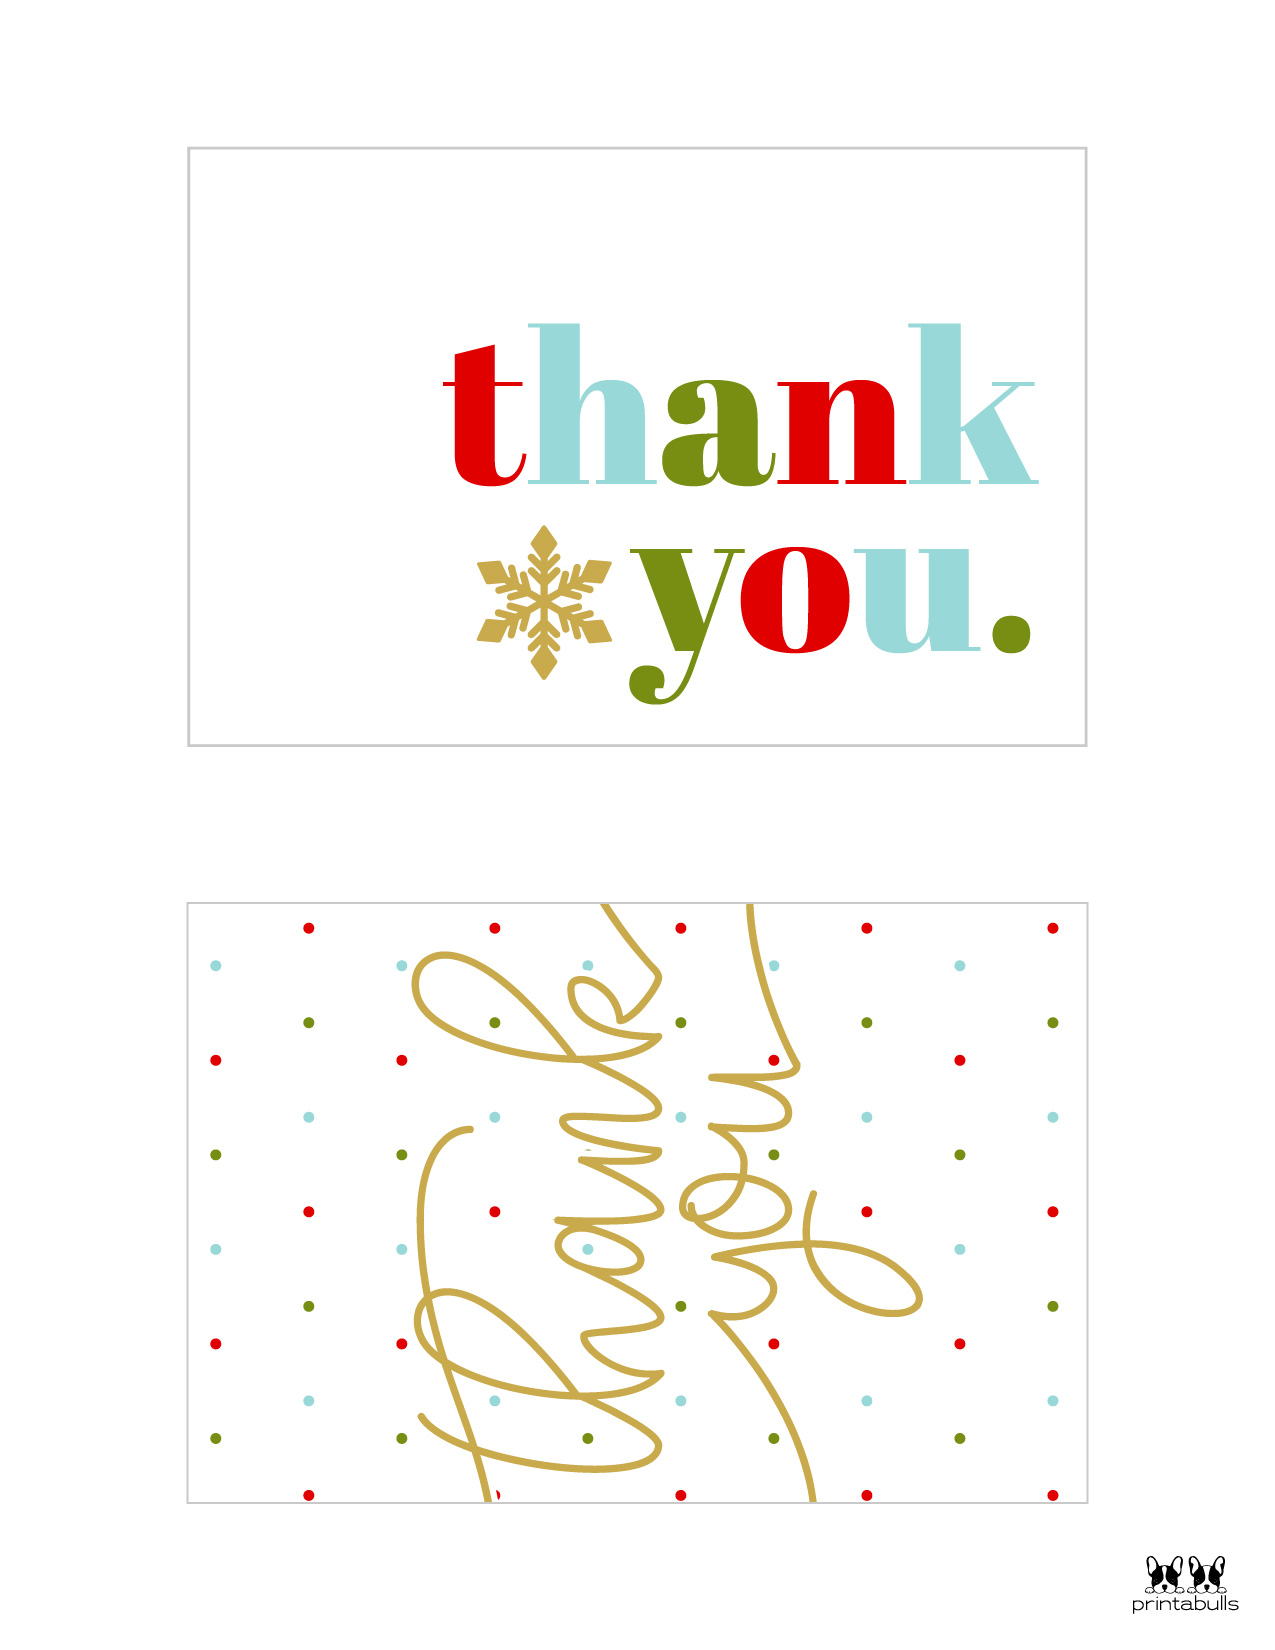 Thank You Cards Near Me